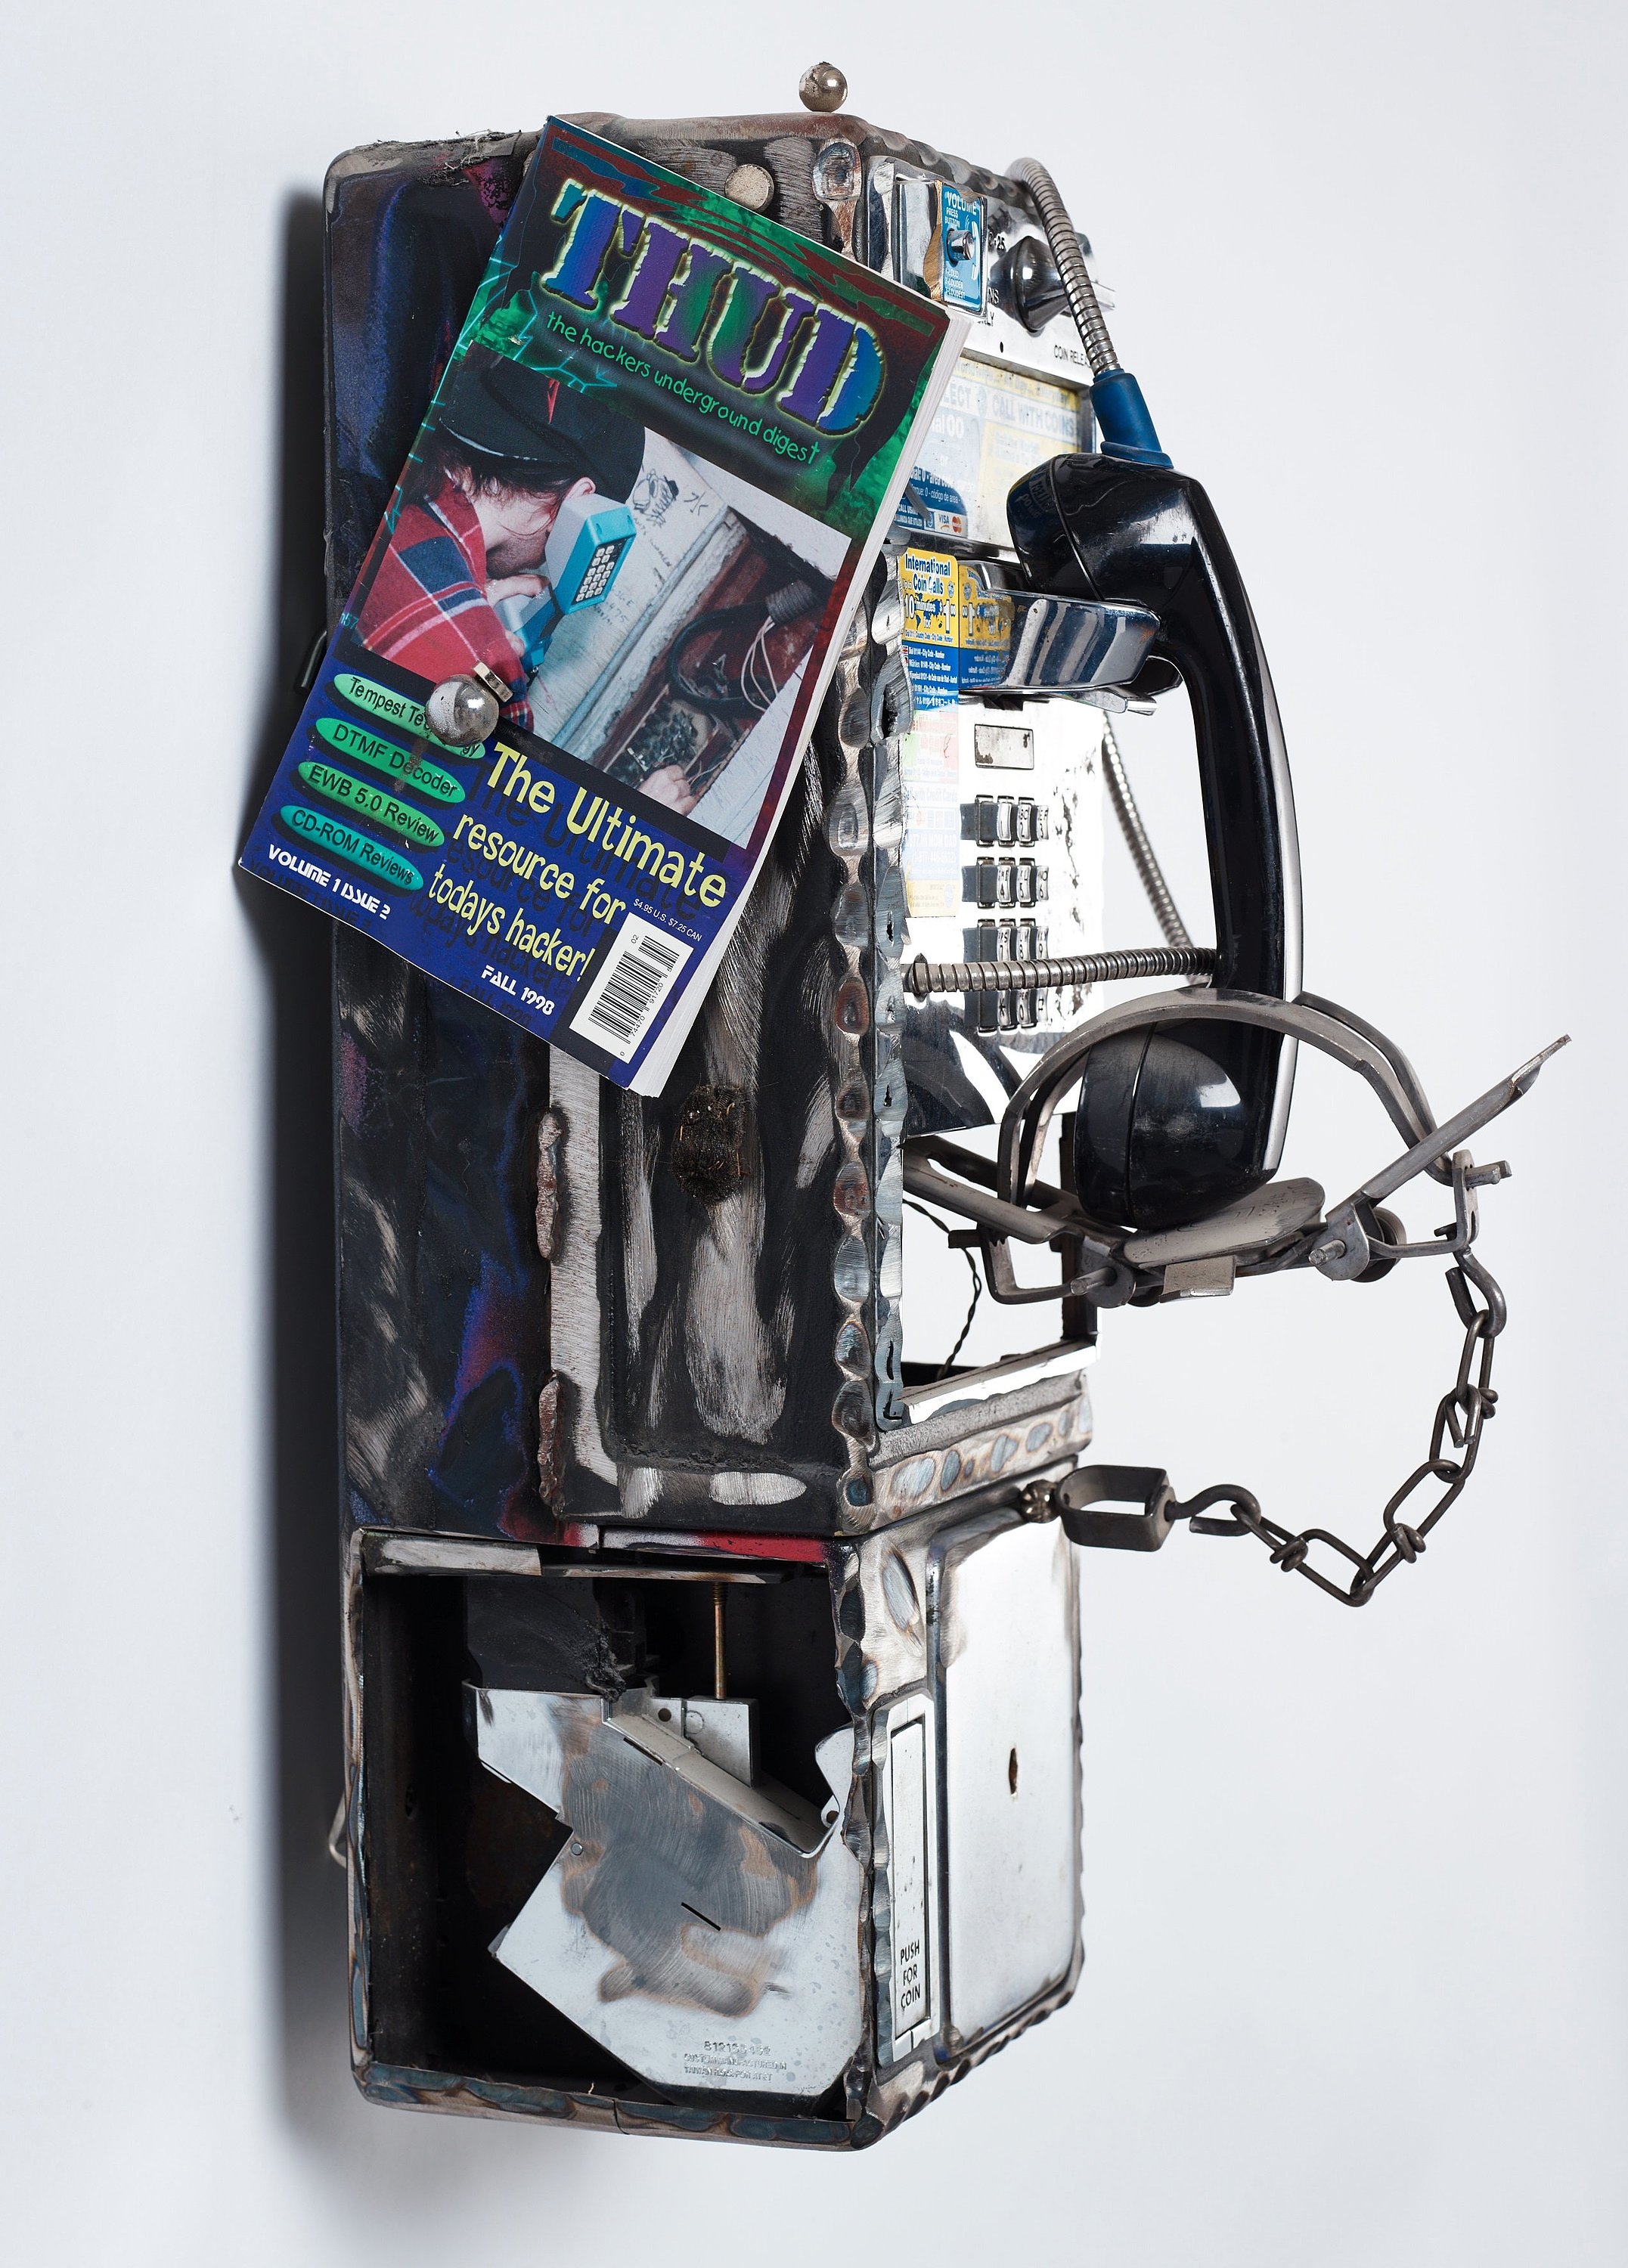 Artwork by Jason Matthew Lee, BRUTEFORCEPHREAK: thud, Made of Welded payphones, magnets, payphone dust, duct tape, small mammal trap, thud magazine